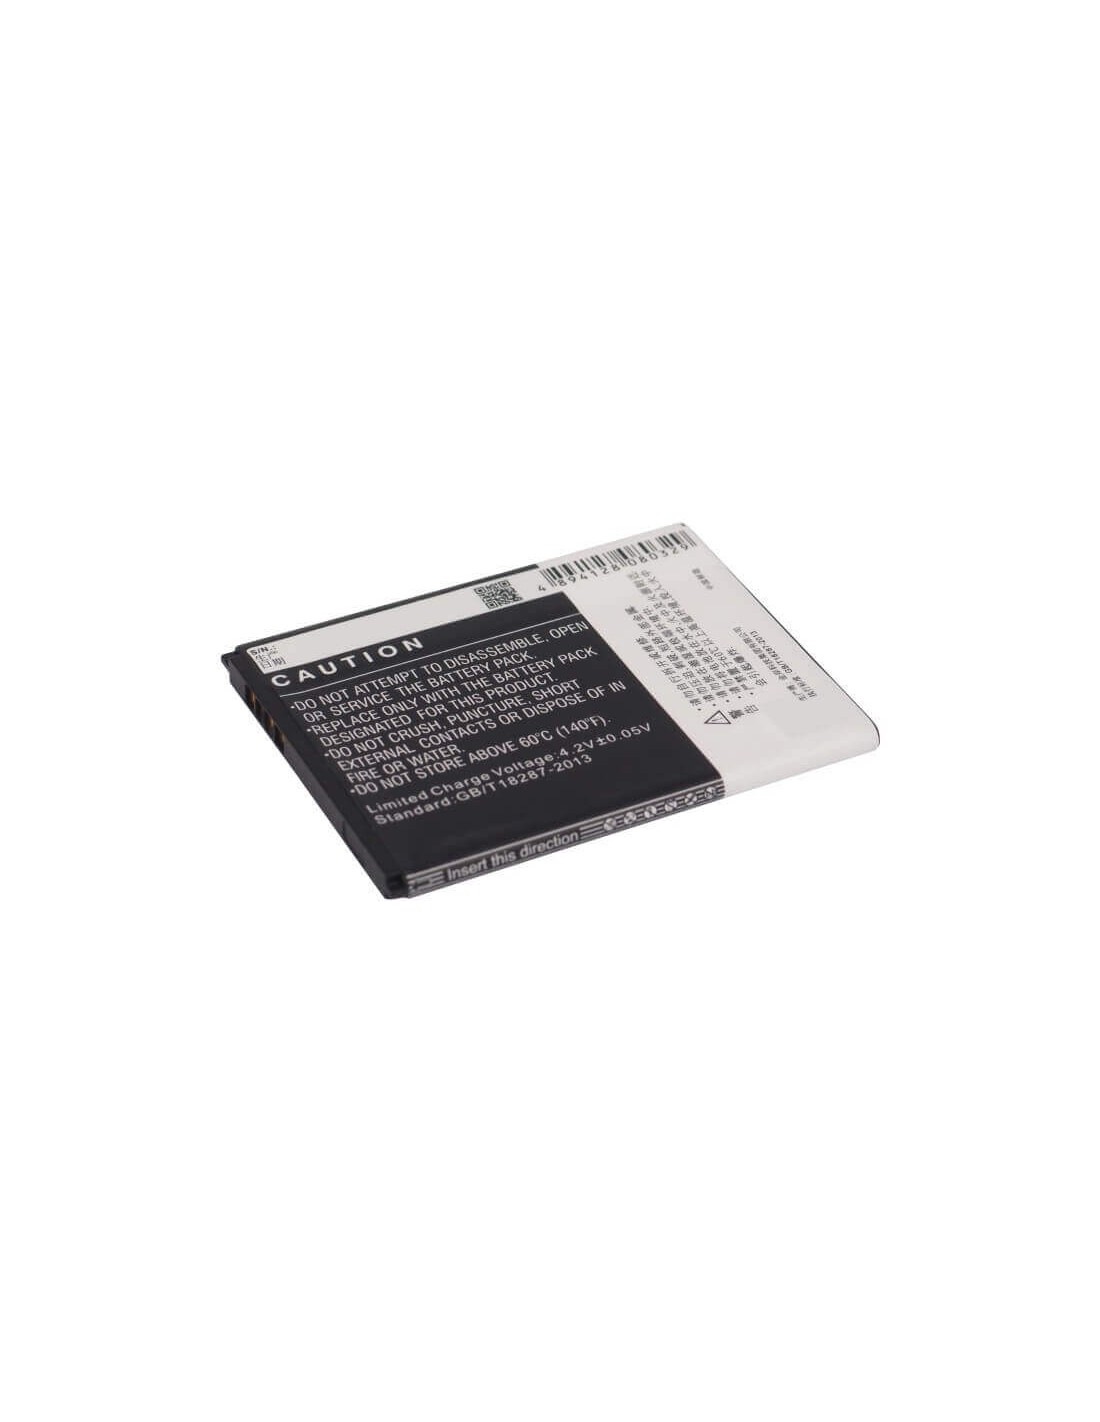 Battery for Alcatel OT-4005D, One Touch Glory 2T, One Touch 4005D 3.7V, 1300mAh - 4.81Wh